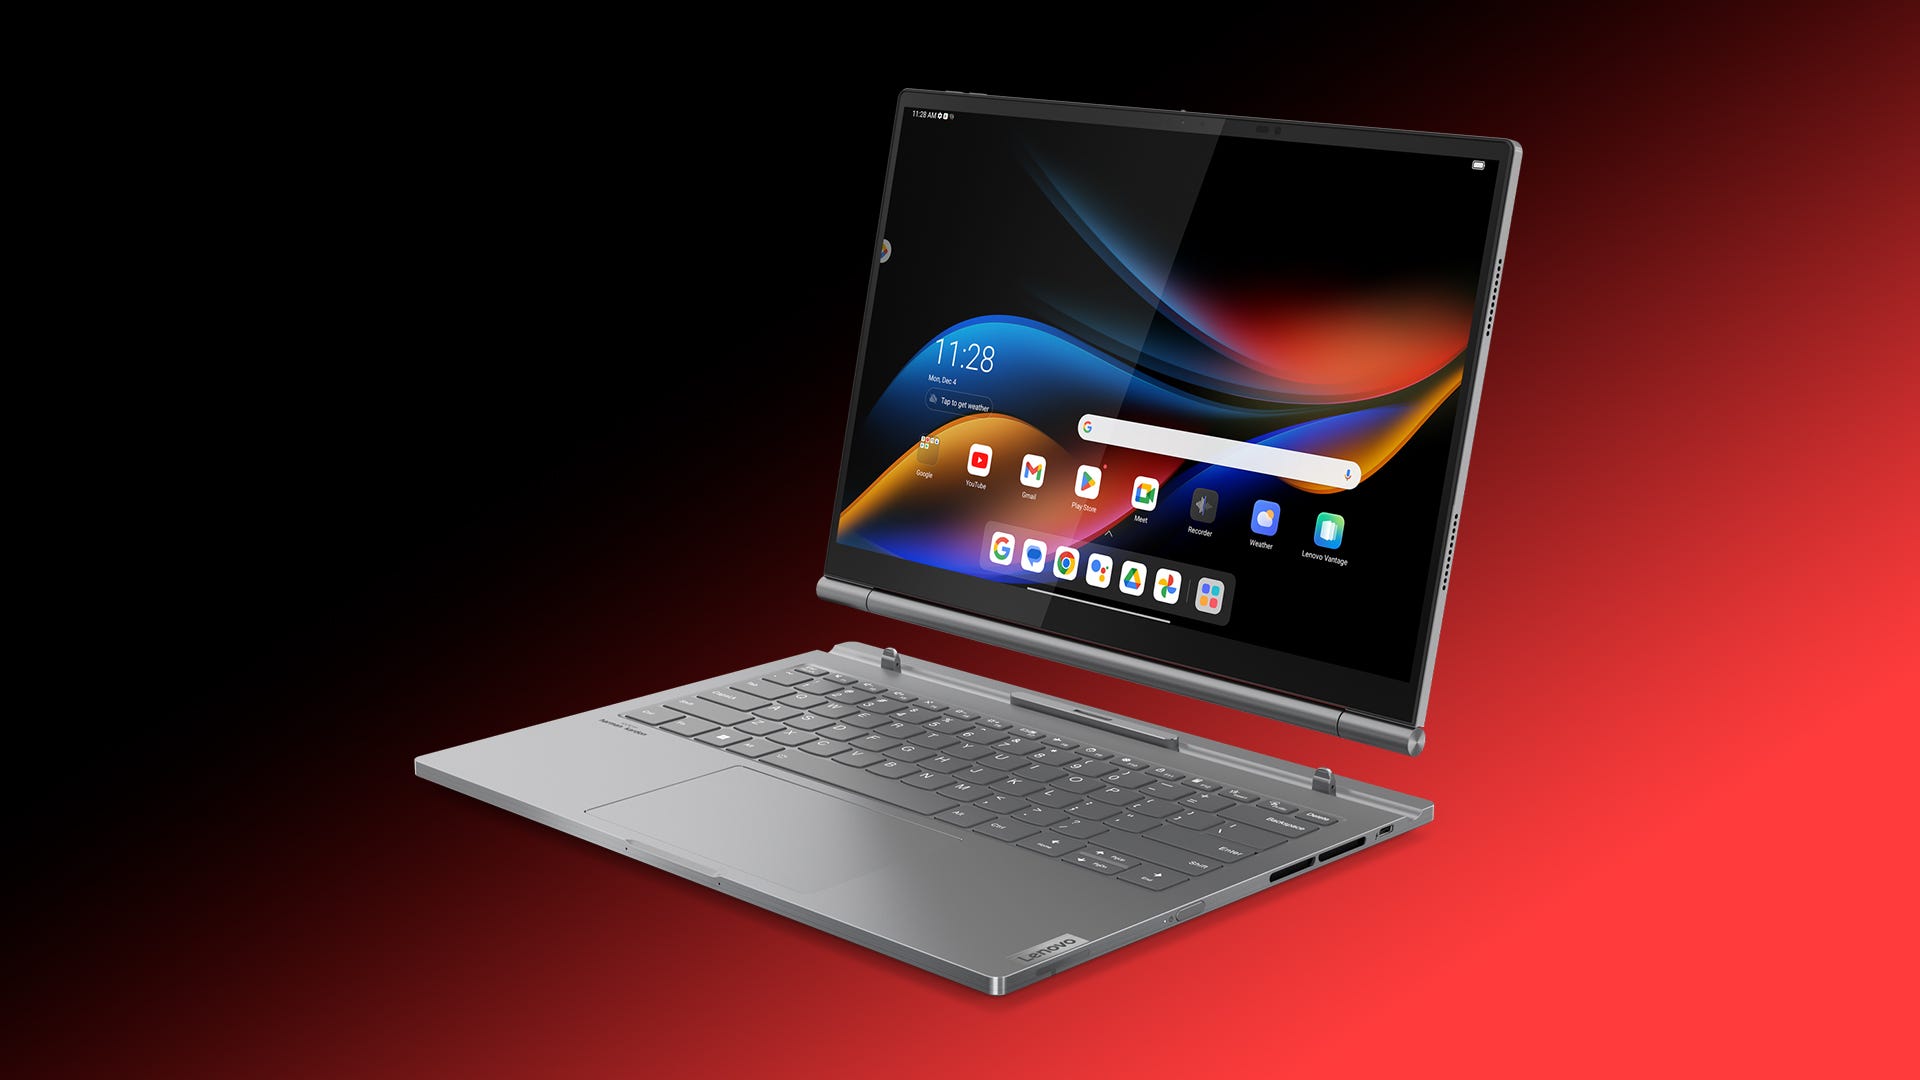 This Lenovo 2-in-1 laptop turns into an Android tablet and Windows PC